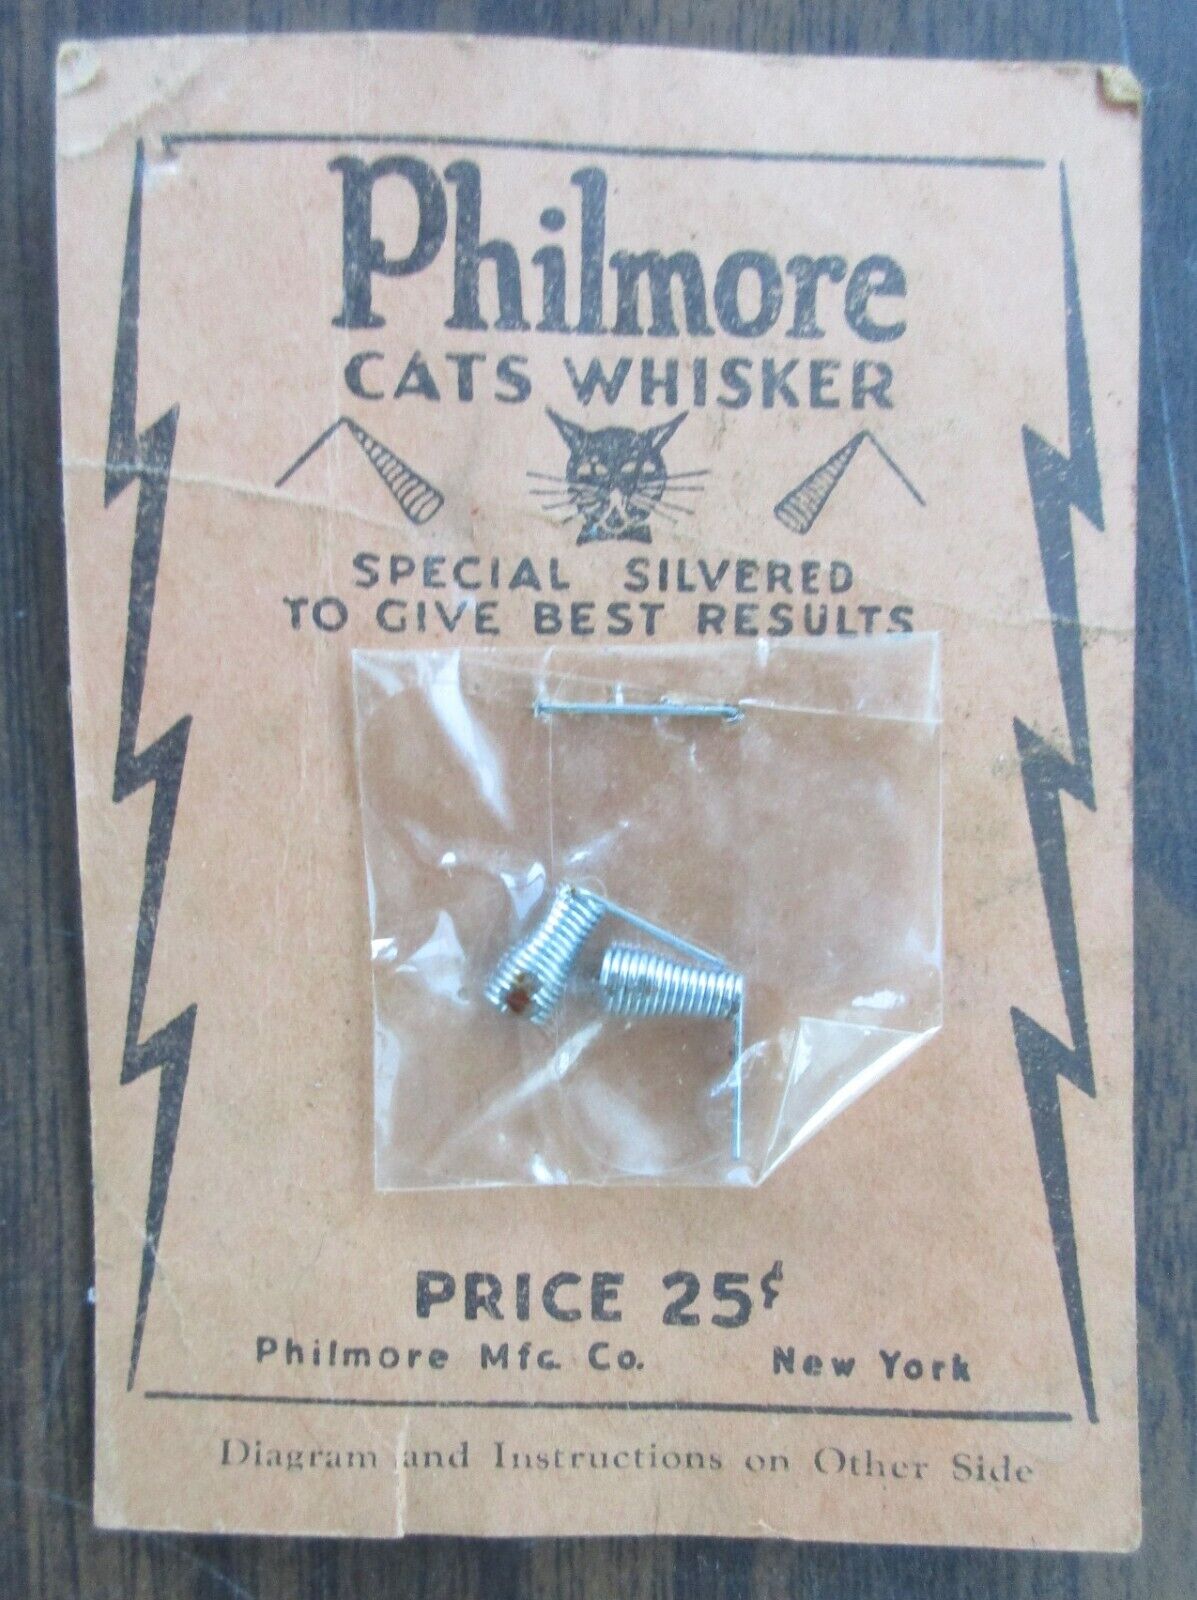 1 package with two Vintage Philmore CATS WHISKERs for CRYSTAL RADIOS